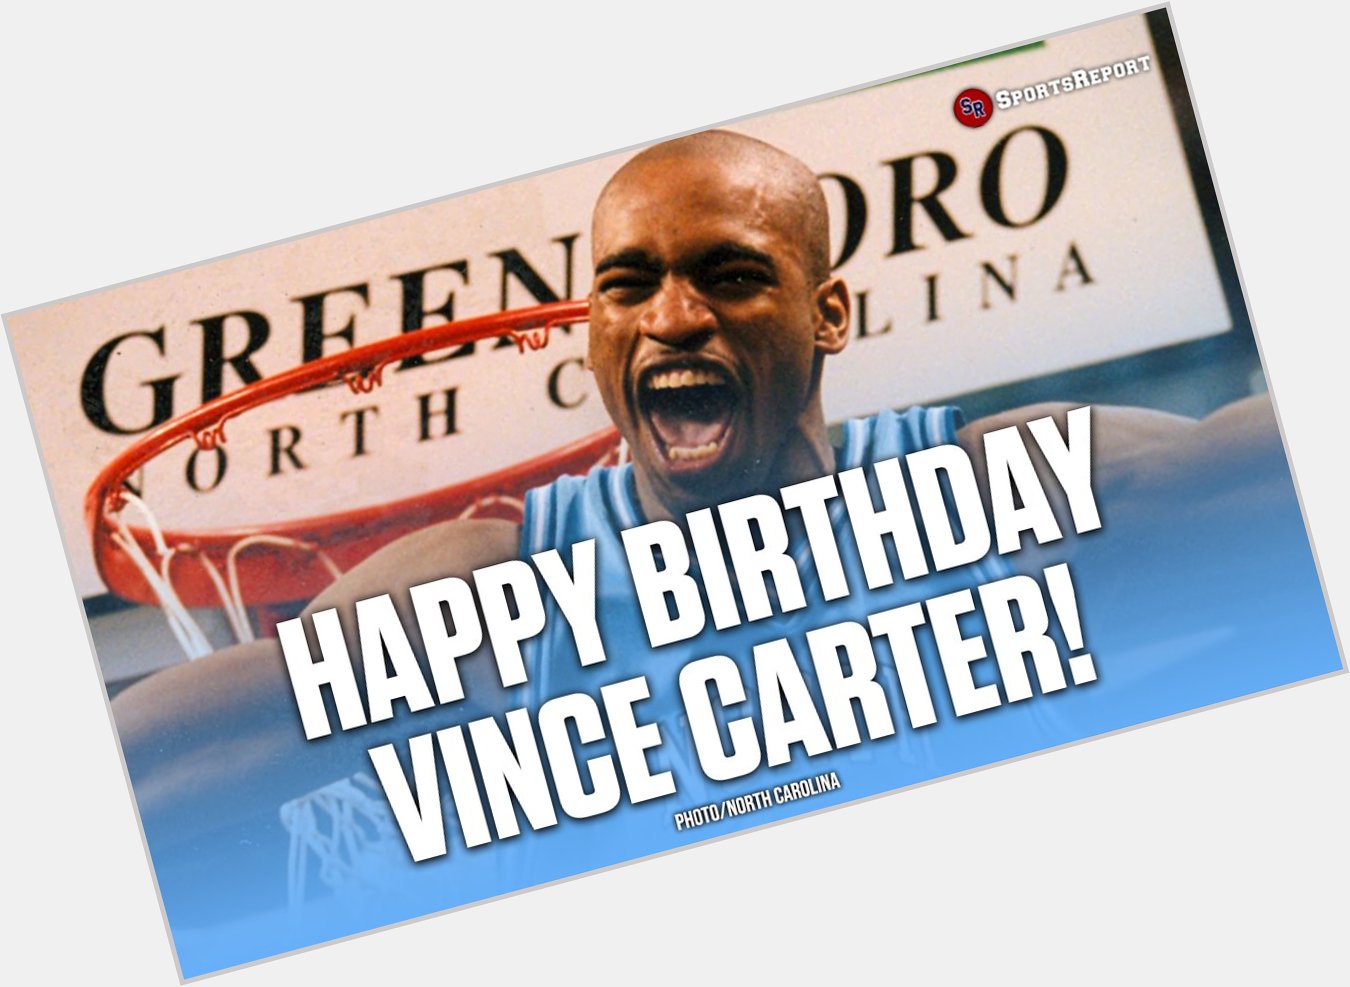  Fans, let\s wish great Vince Carter a Happy Birthday! 